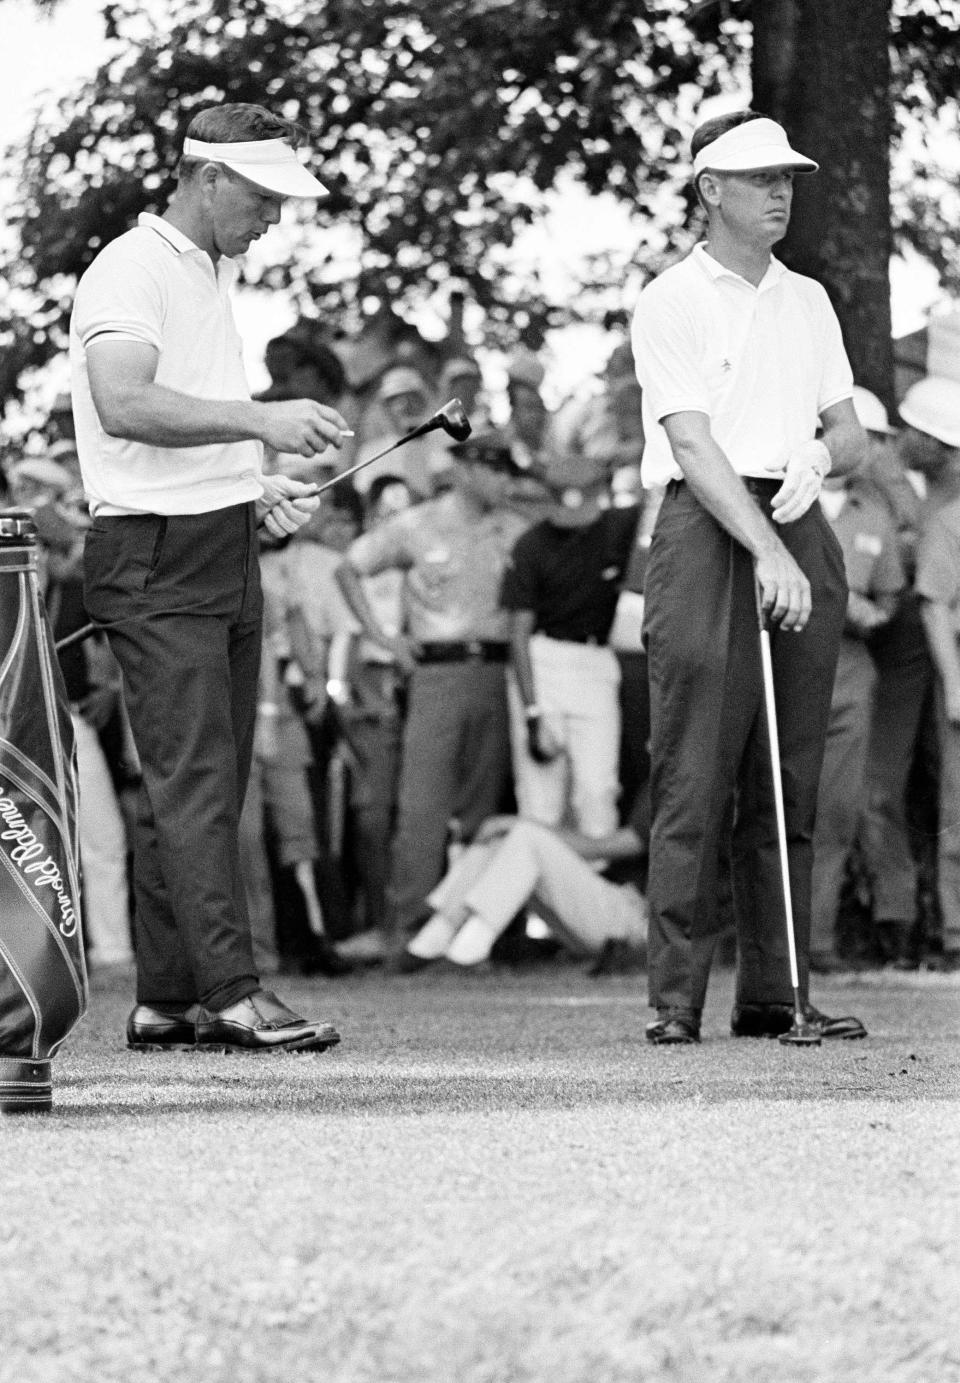 Arnold Palmer, left, and Tommy Jacobs are on first tee as they started their 36-hole grind in last two rounds of the National Open Golf Championship on June 20, 1964 at Washington’s Congressional Country Club.